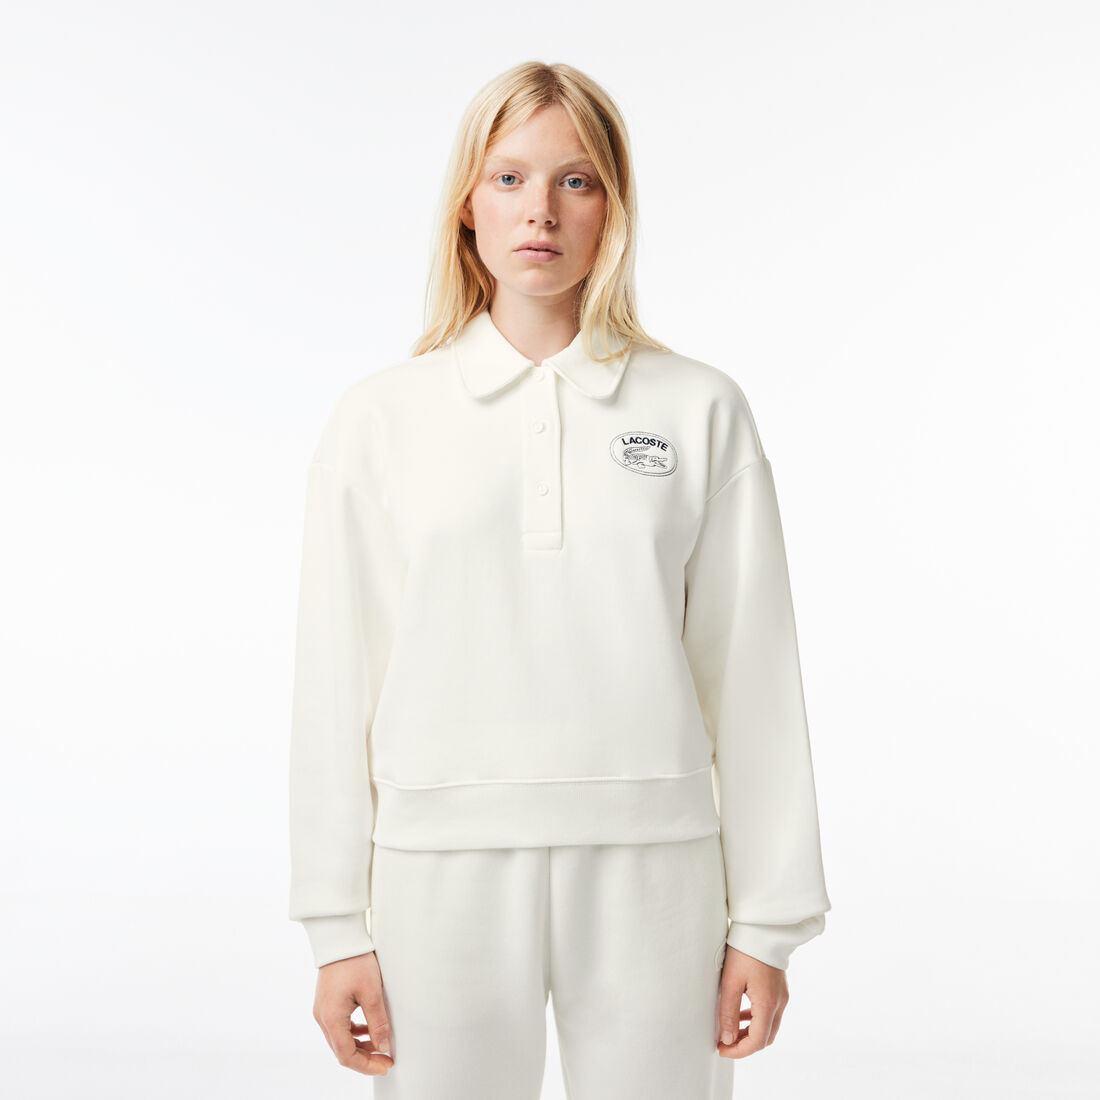 Lacoste Embroidered Polo Neck Jogger Sweatshirt - SF3469-00-70V